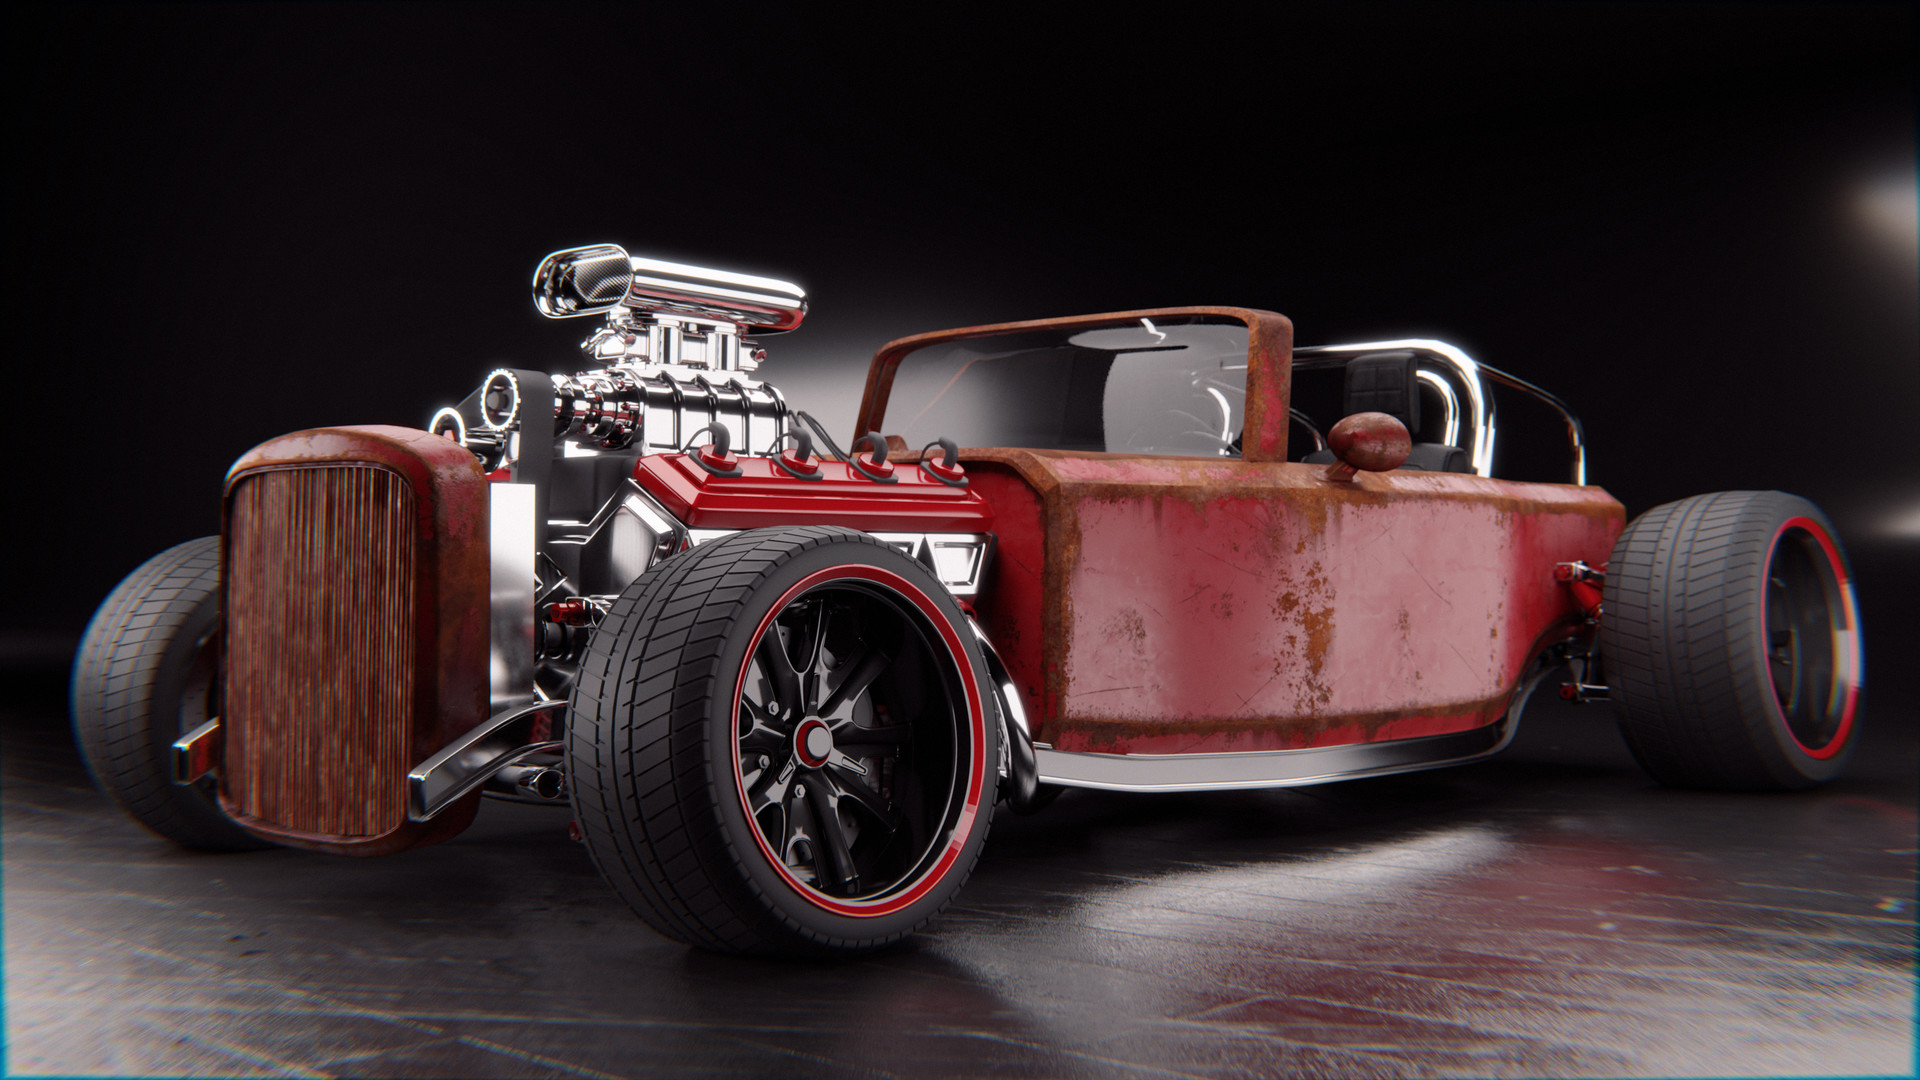 A restored hot rod packed with new horses.